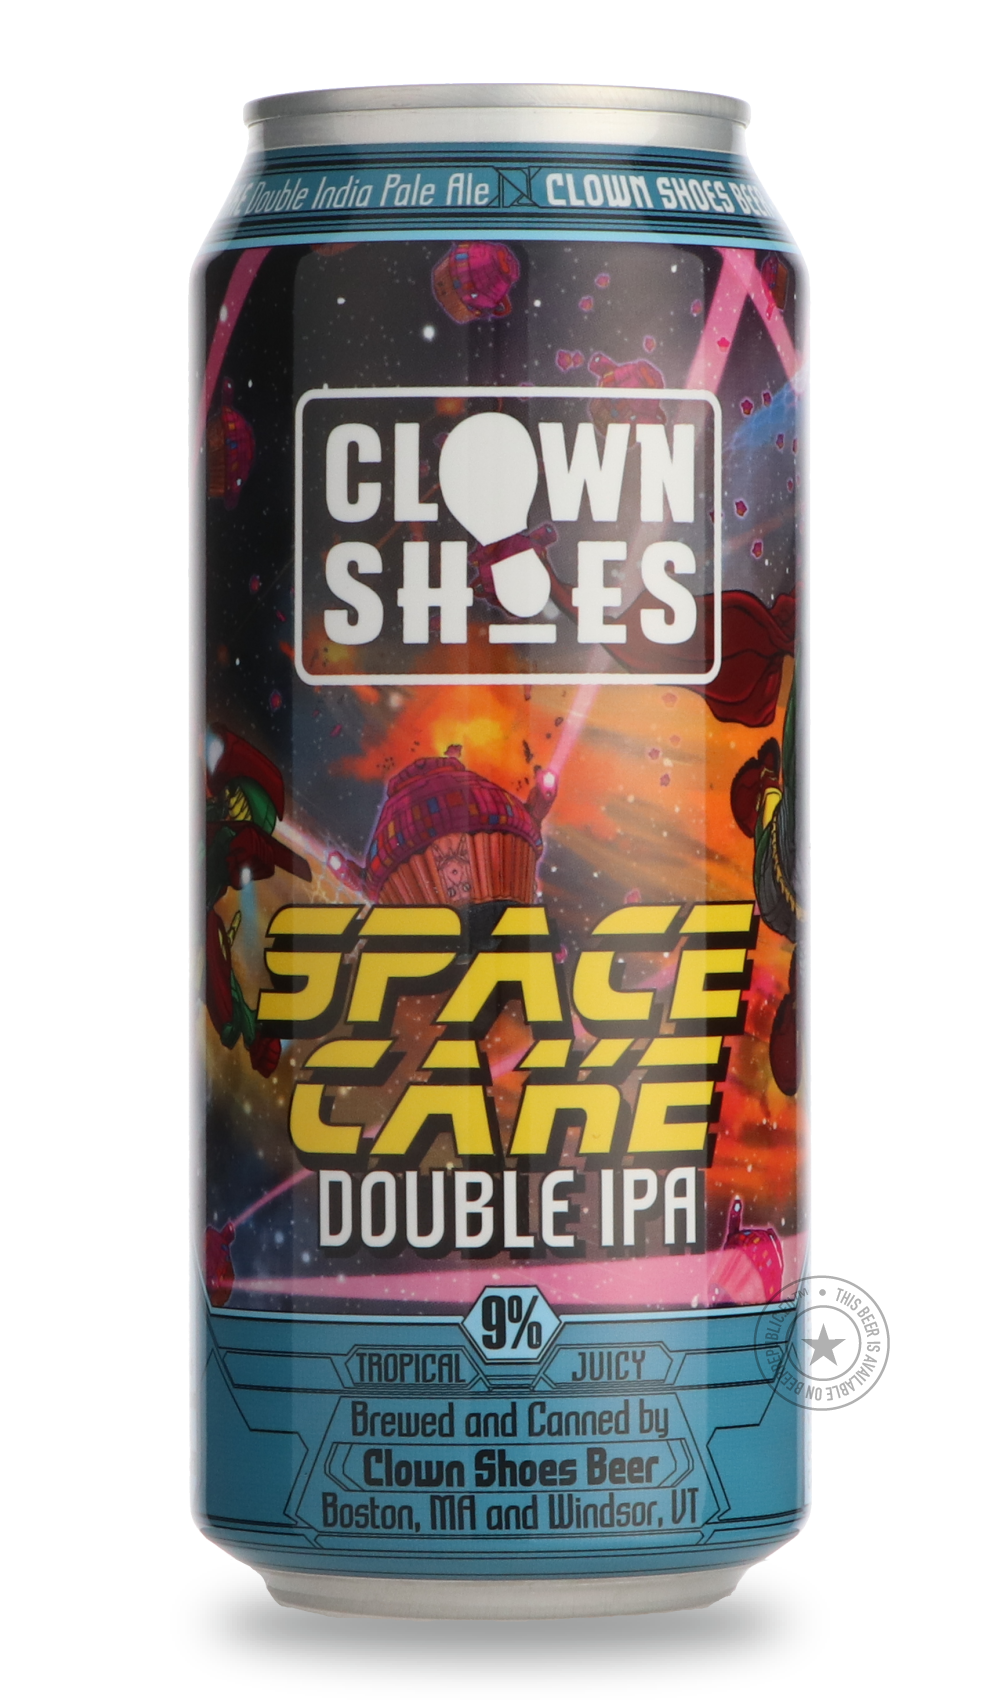 -Clown Shoes- Space Cake-IPA- Only @ Beer Republic - The best online beer store for American & Canadian craft beer - Buy beer online from the USA and Canada - Bier online kopen - Amerikaans bier kopen - Craft beer store - Craft beer kopen - Amerikanisch bier kaufen - Bier online kaufen - Acheter biere online - IPA - Stout - Porter - New England IPA - Hazy IPA - Imperial Stout - Barrel Aged - Barrel Aged Imperial Stout - Brown - Dark beer - Blond - Blonde - Pilsner - Lager - Wheat - Weizen - Amber - Barley W